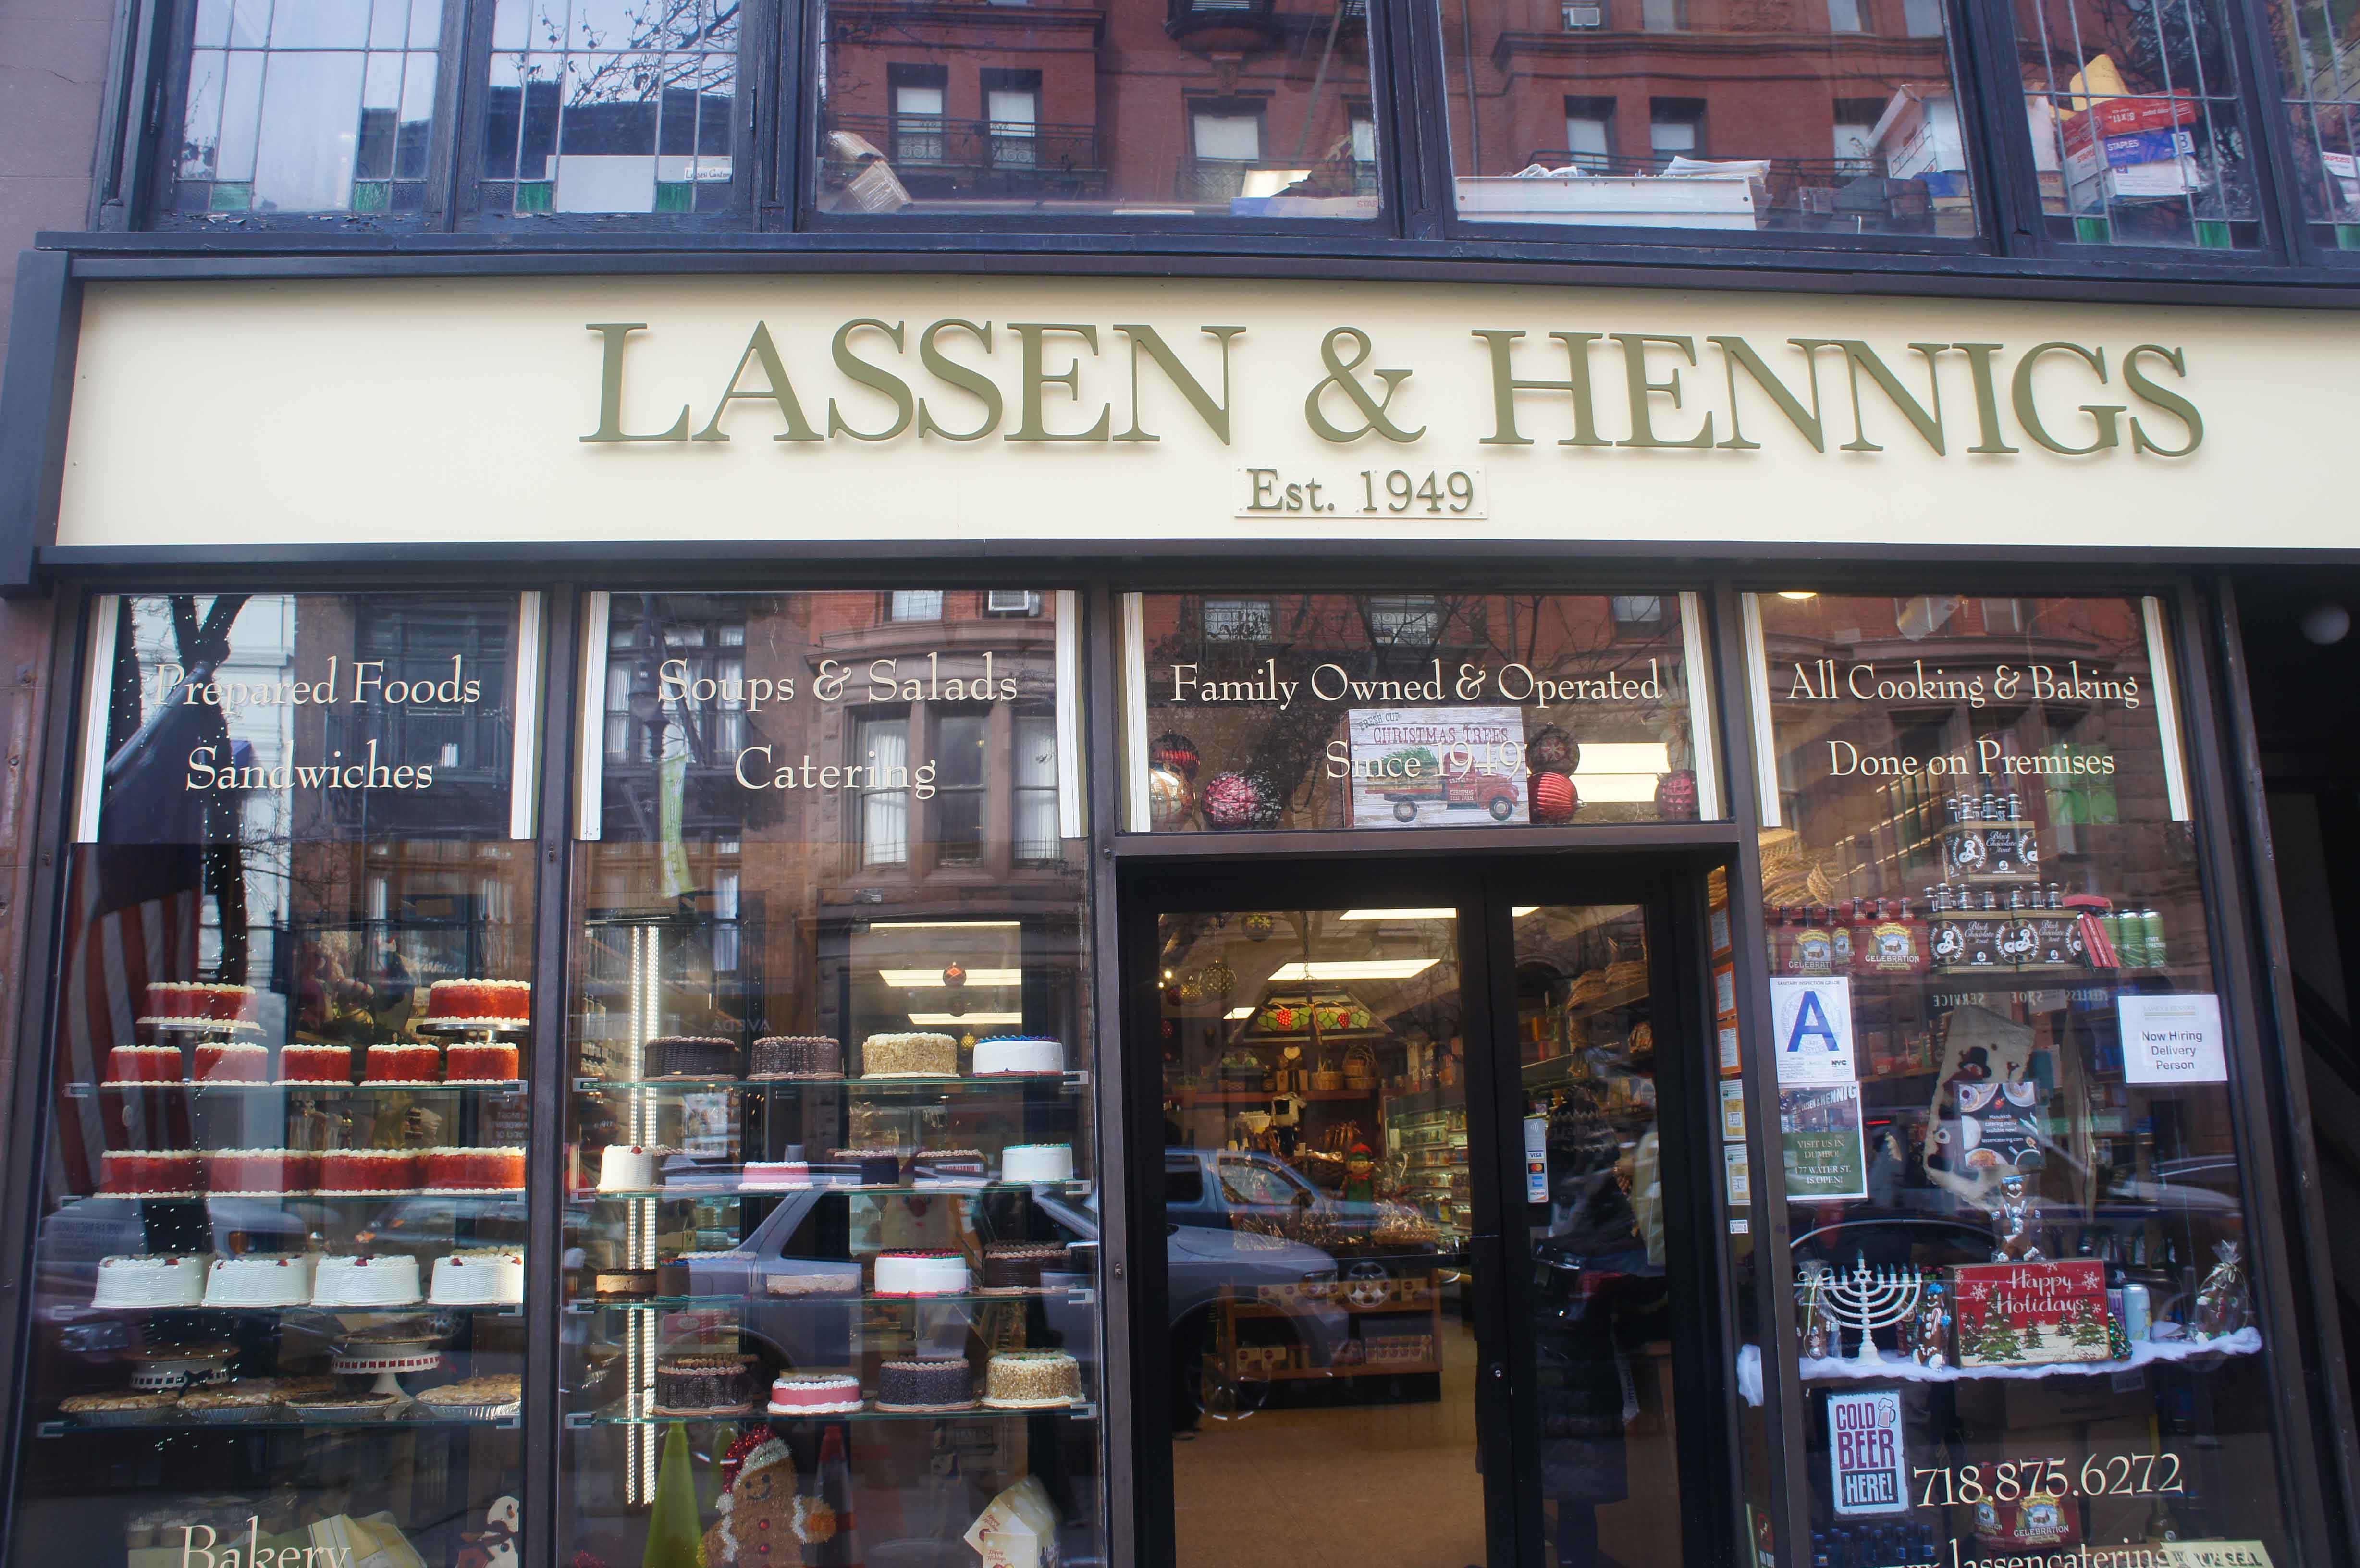 Picture of Lassen & Hennigs, a well-known deli & bakery on Montague Street, offering Brooklyn Heights residents salads, soups & sandwiches, plus classic desserts